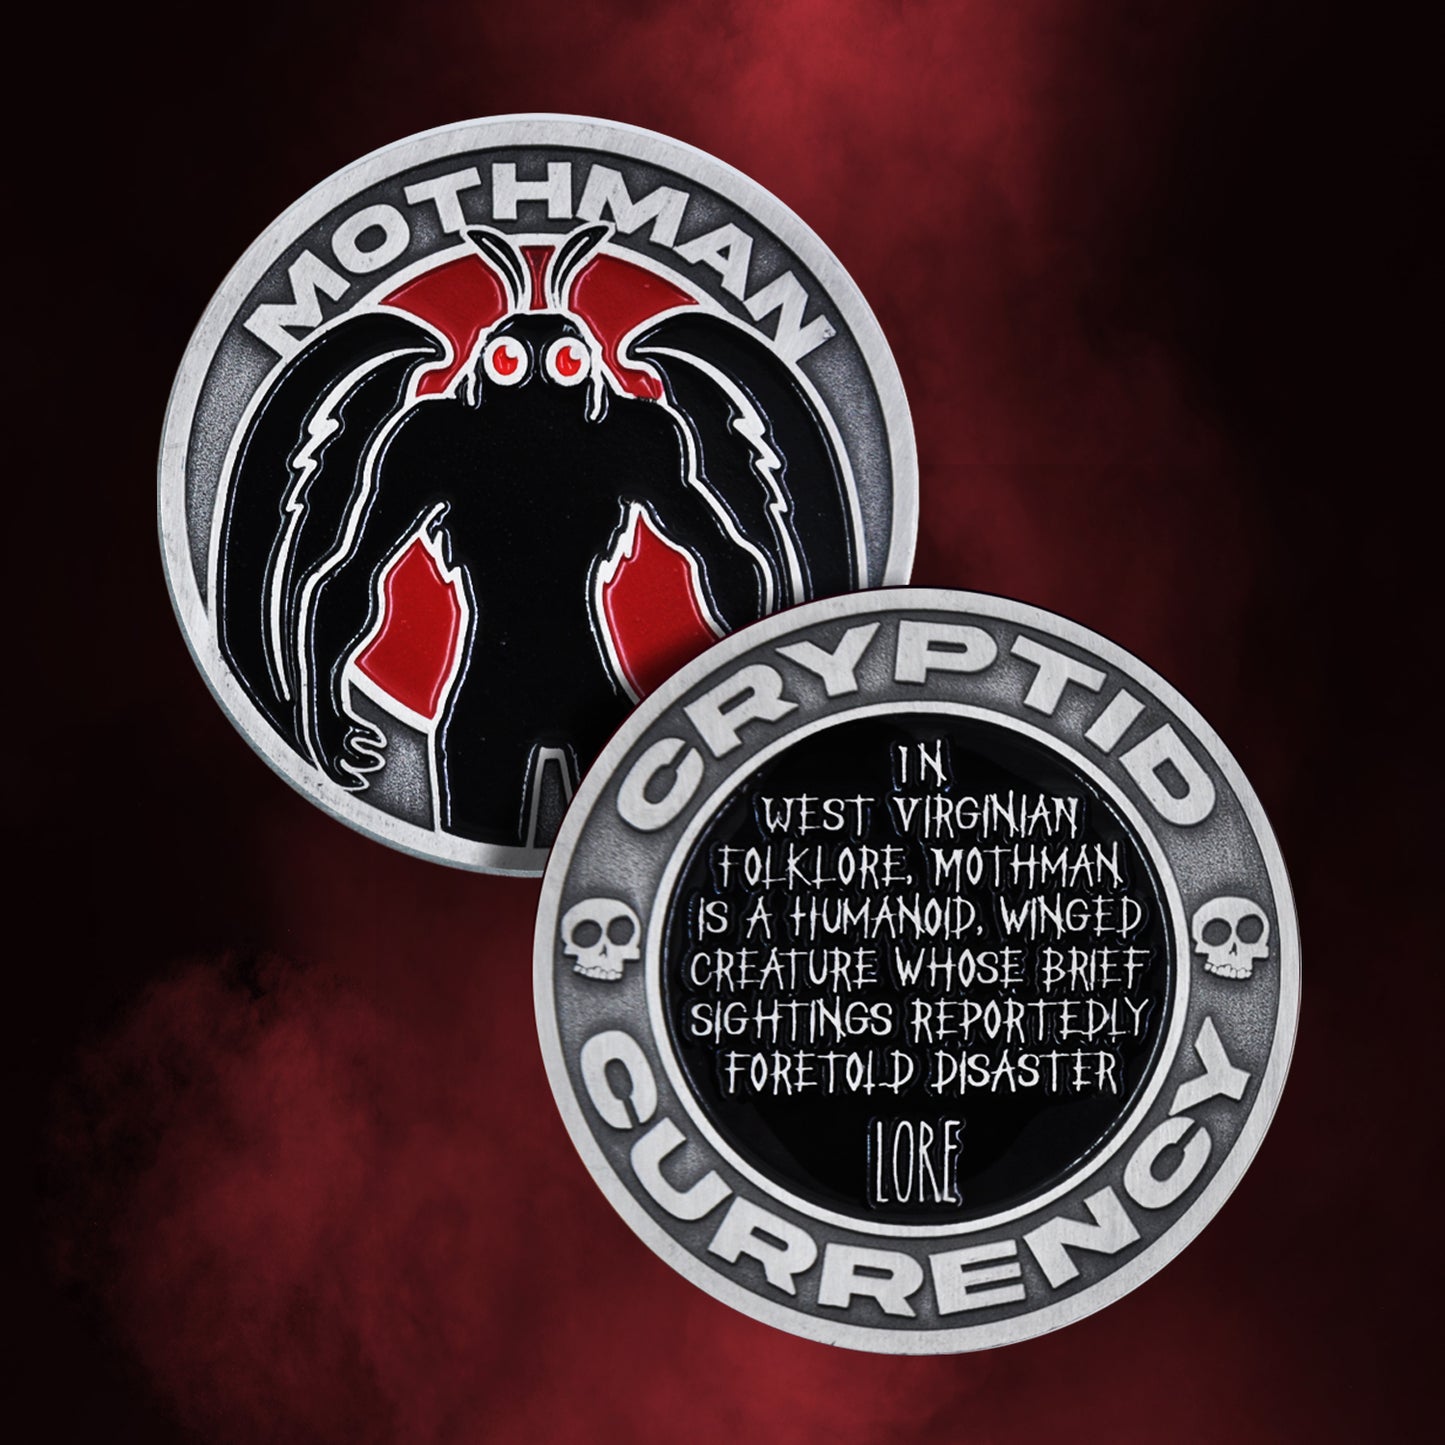 A front and back image of a brass coin, on a red and black background. On the front is a black silhouette of Mothman. On the back is a black circle with white text saying "in west virginian folklore, mothman is a humanoid, winged creature whose brief sightings reportedly foretold disaster: Lore." Around the edge of the coin are stamped letters saying "cryptid currency."